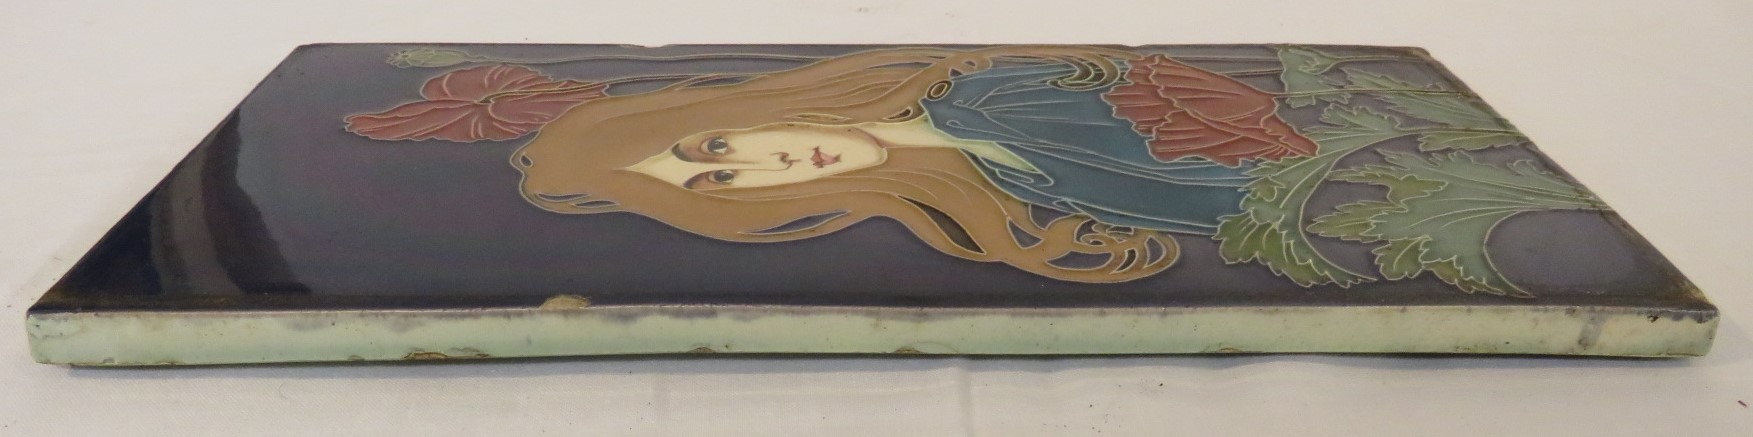 An Art Nouveau ceramic tile by Carl Sigmund Luber, depicting head and shoulders of woman in blue - Image 9 of 14